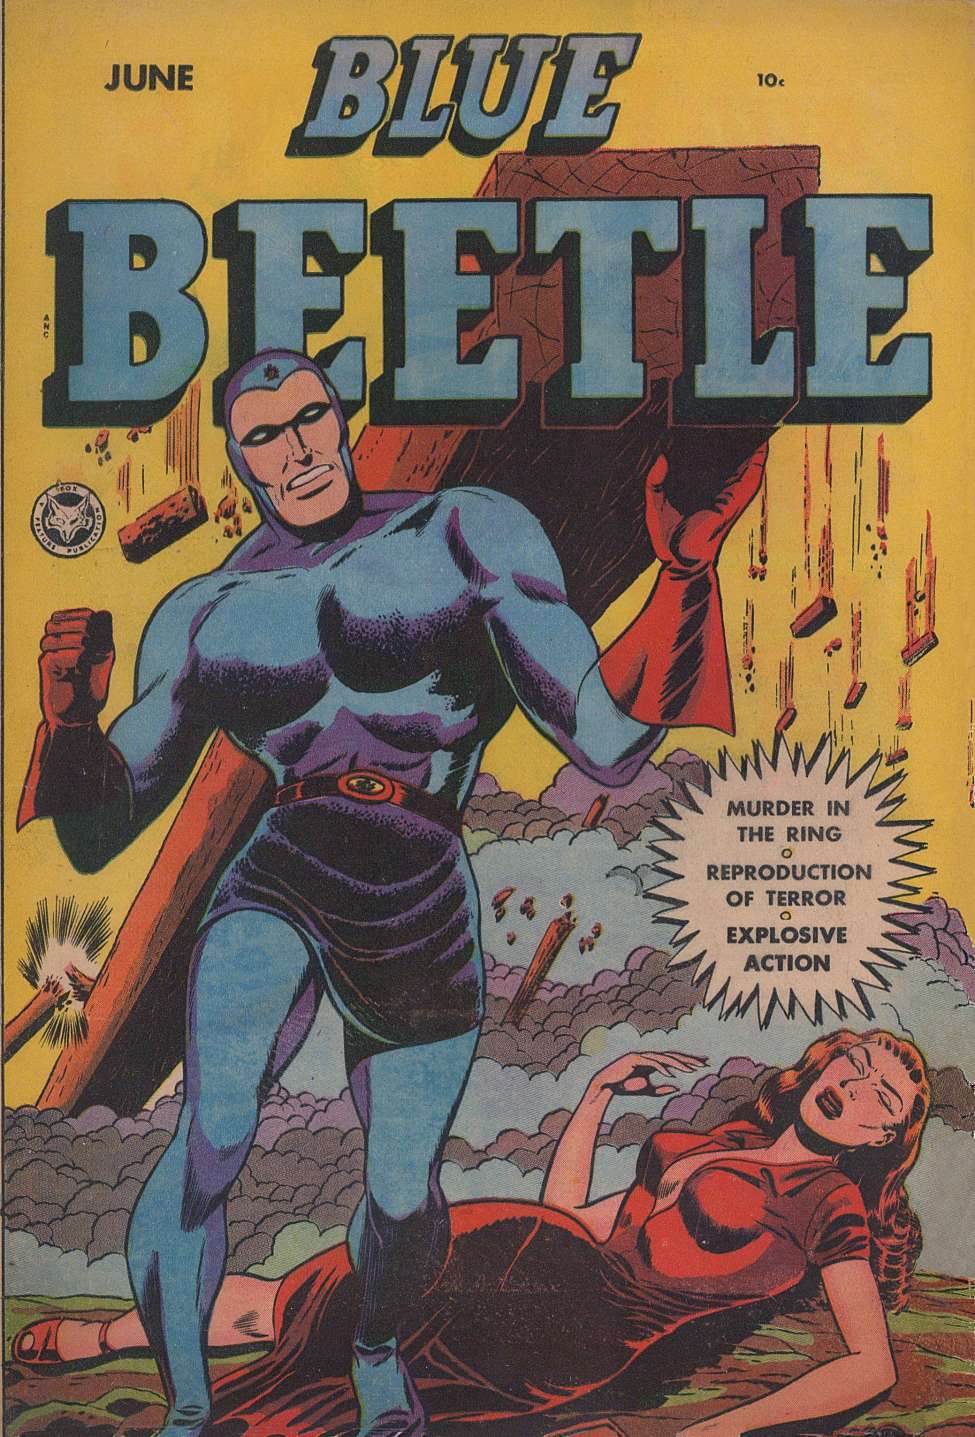 Book Cover For Blue Beetle 59